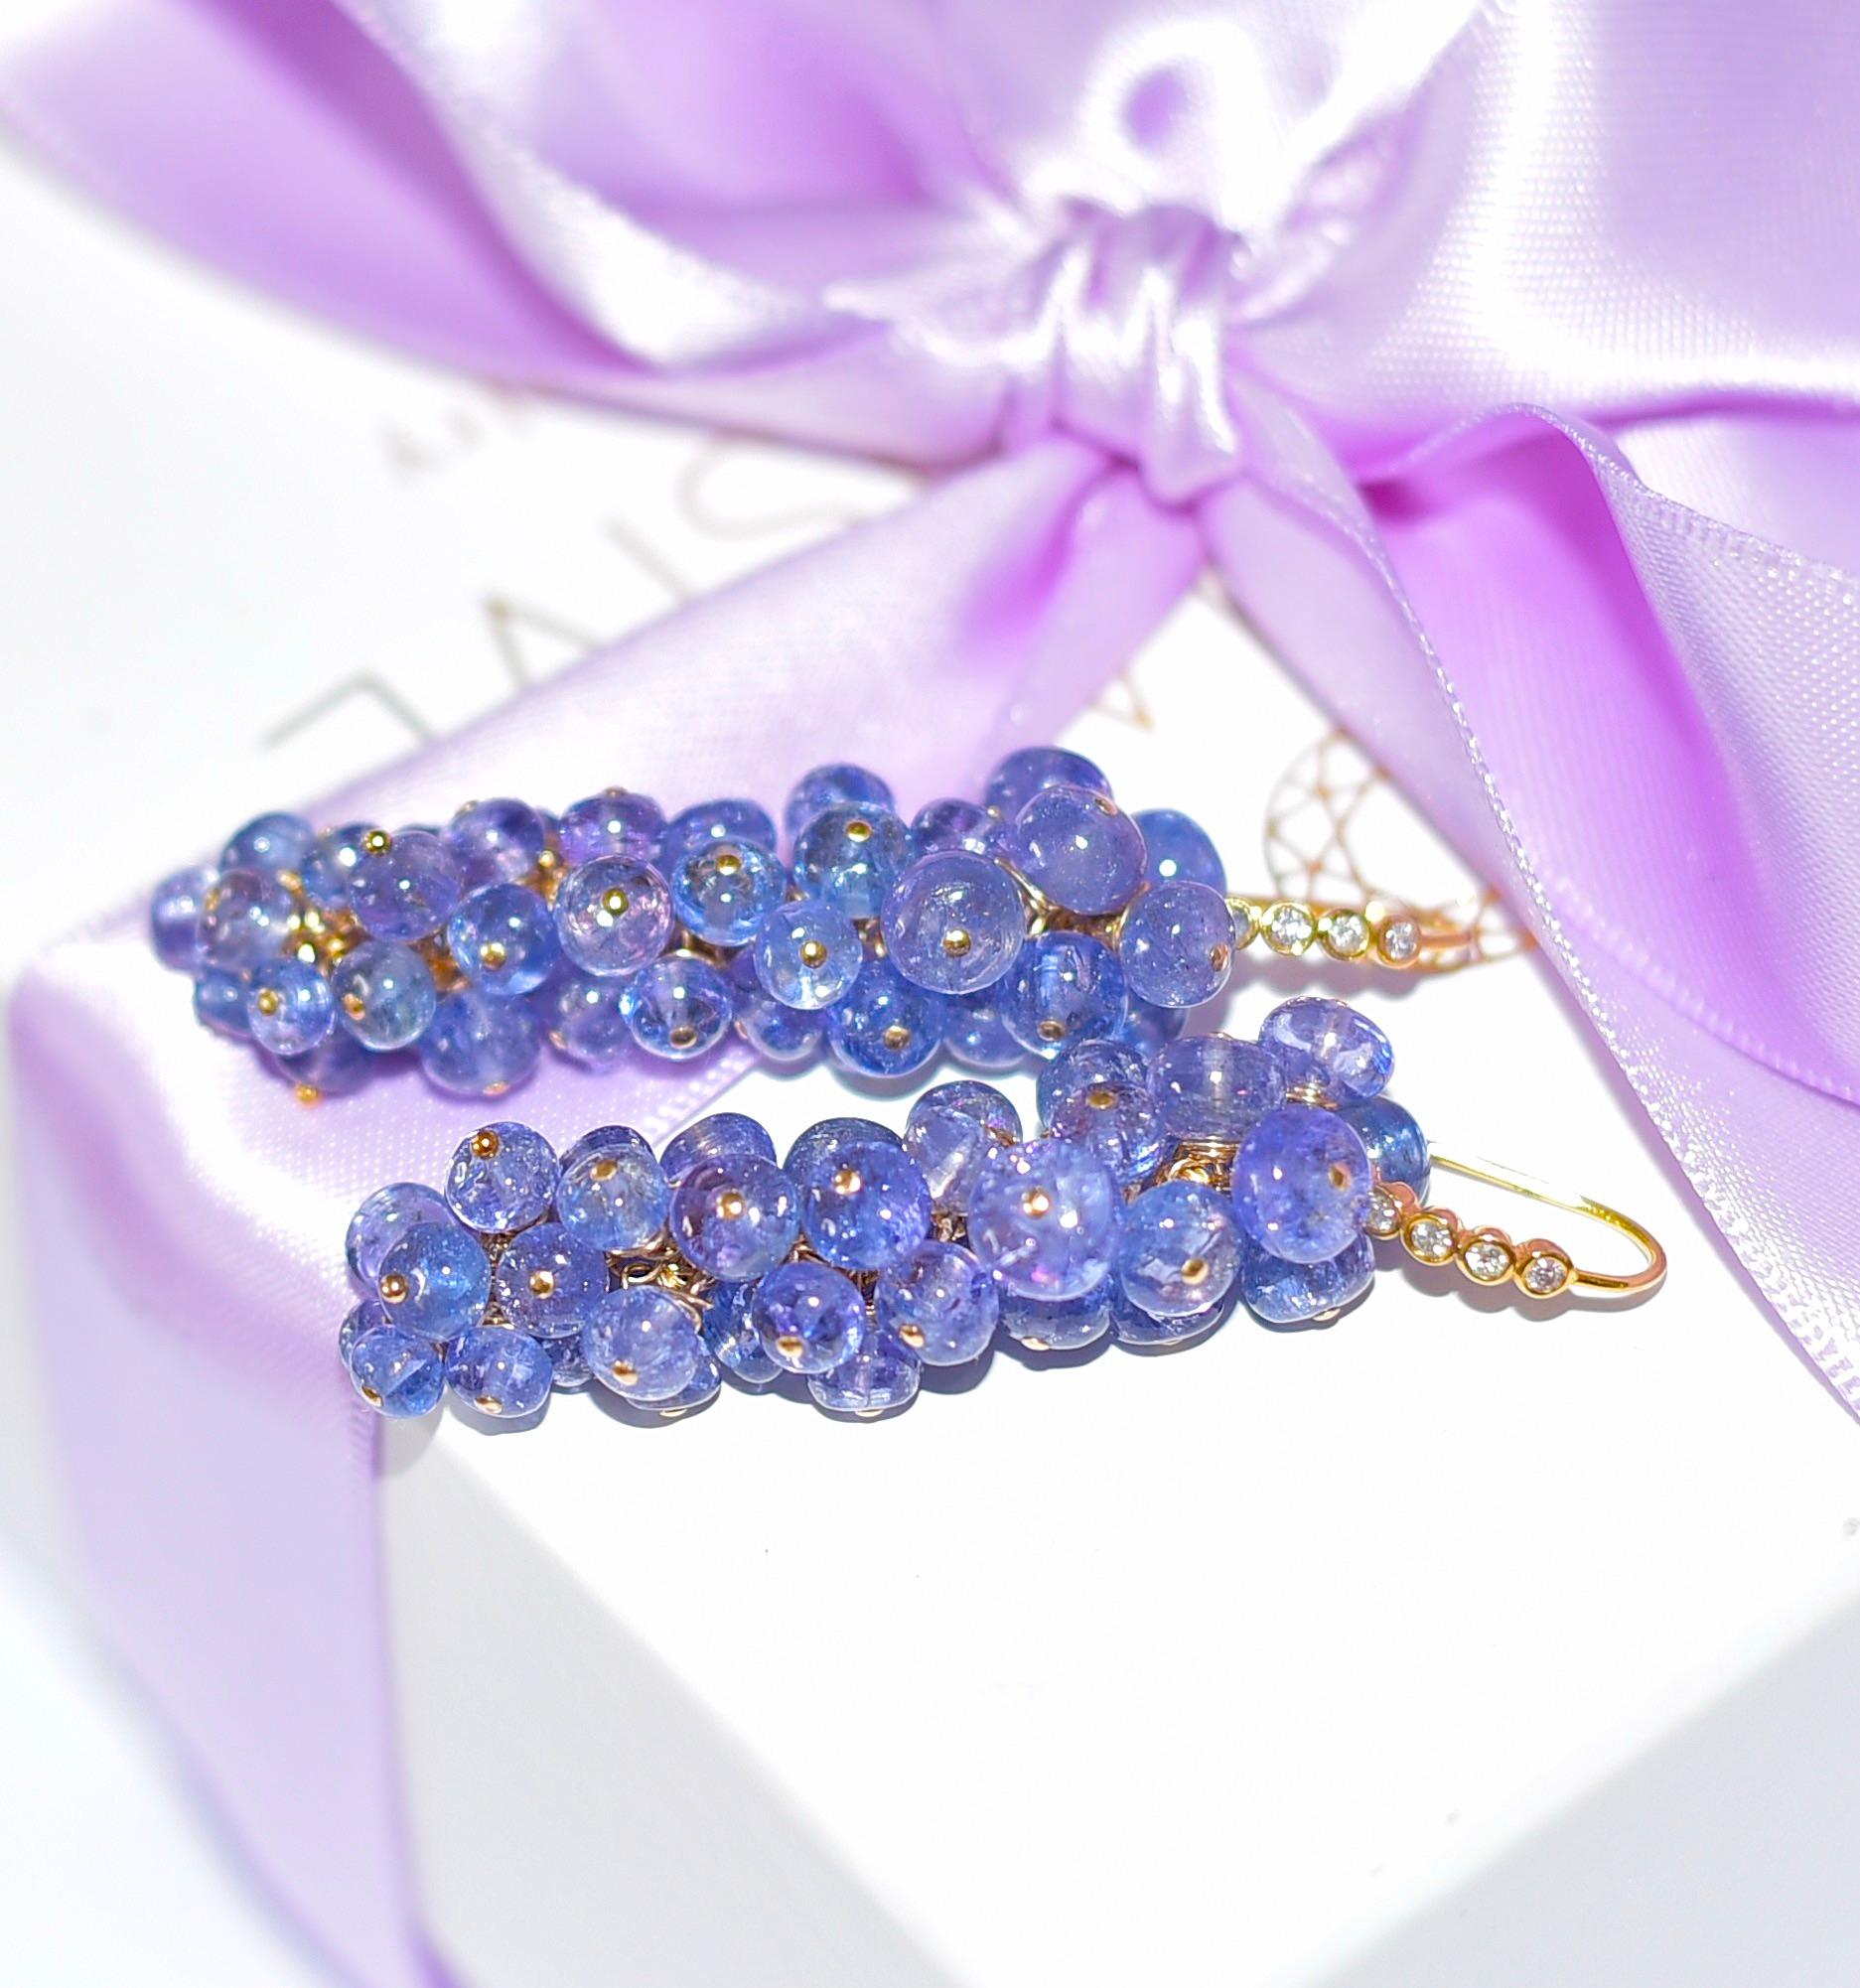 Striking and luxurious Tanzanite earrings are not to be missed! Rich and vibrant characteristic periwinkle color and marvelous gem-grade clarity! 
Tanzanite beads soze 3.7mm-6.3mm
Earwire: Extraordinary 14K Solid Yellow Gold ear wires with sparkly